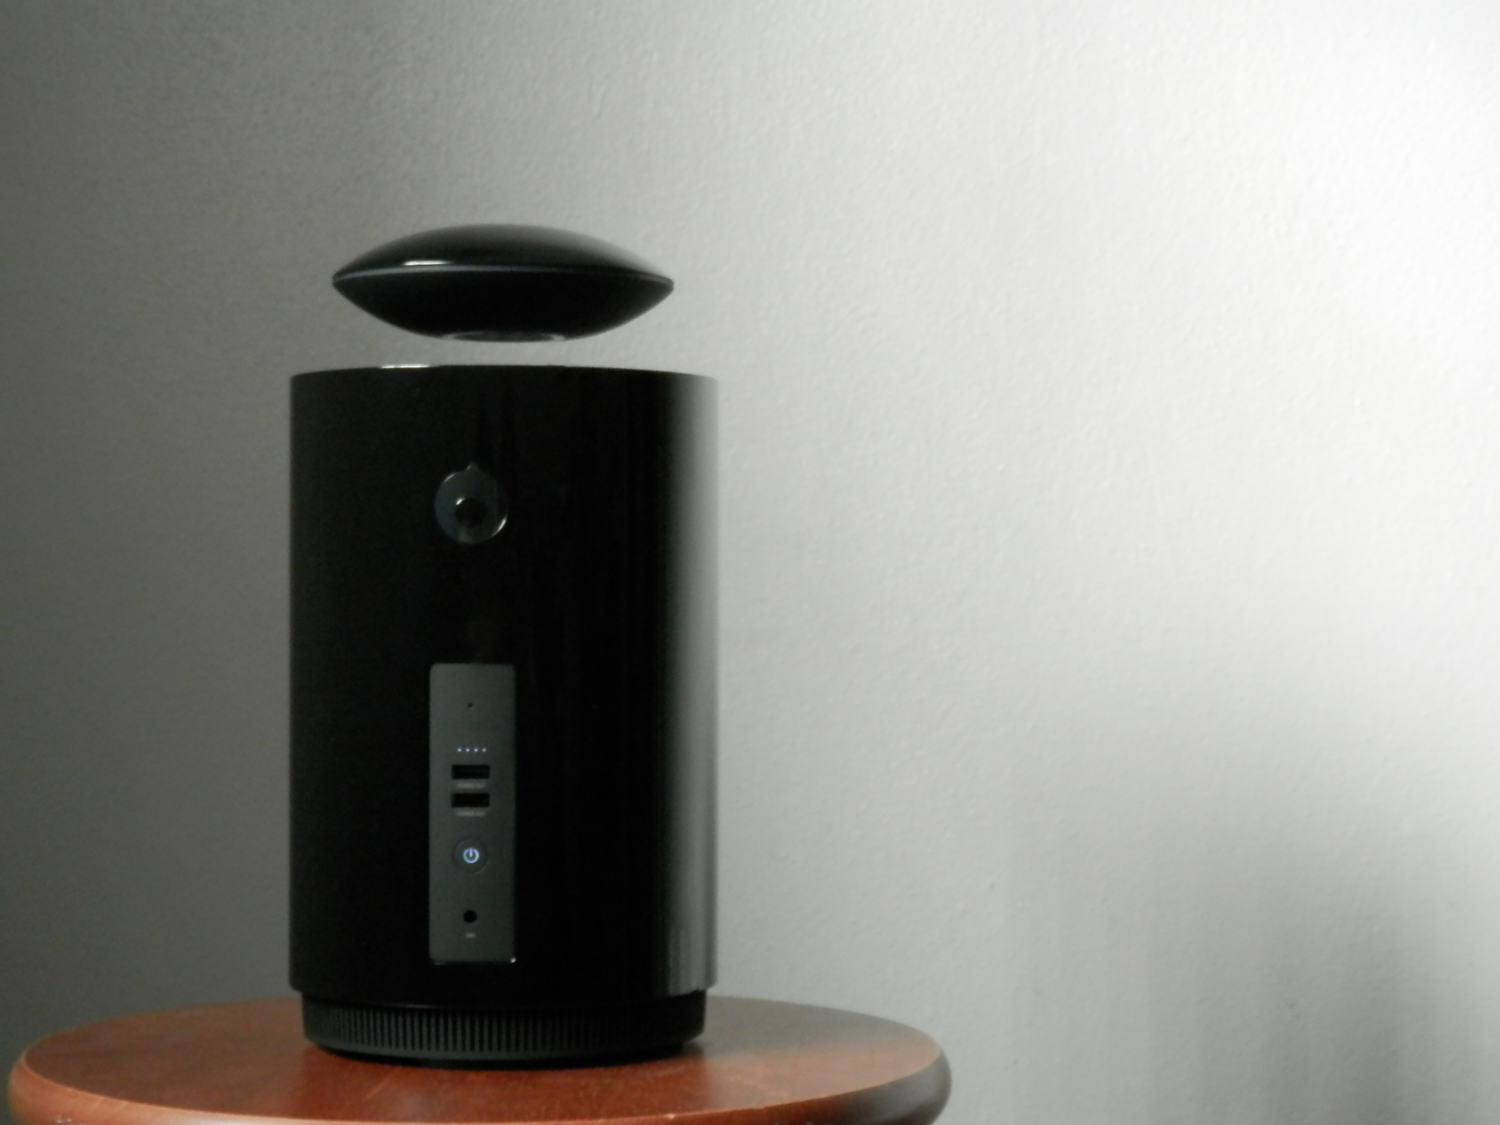 Mars is a levitating Bluetooth speaker that's jam-packed with features